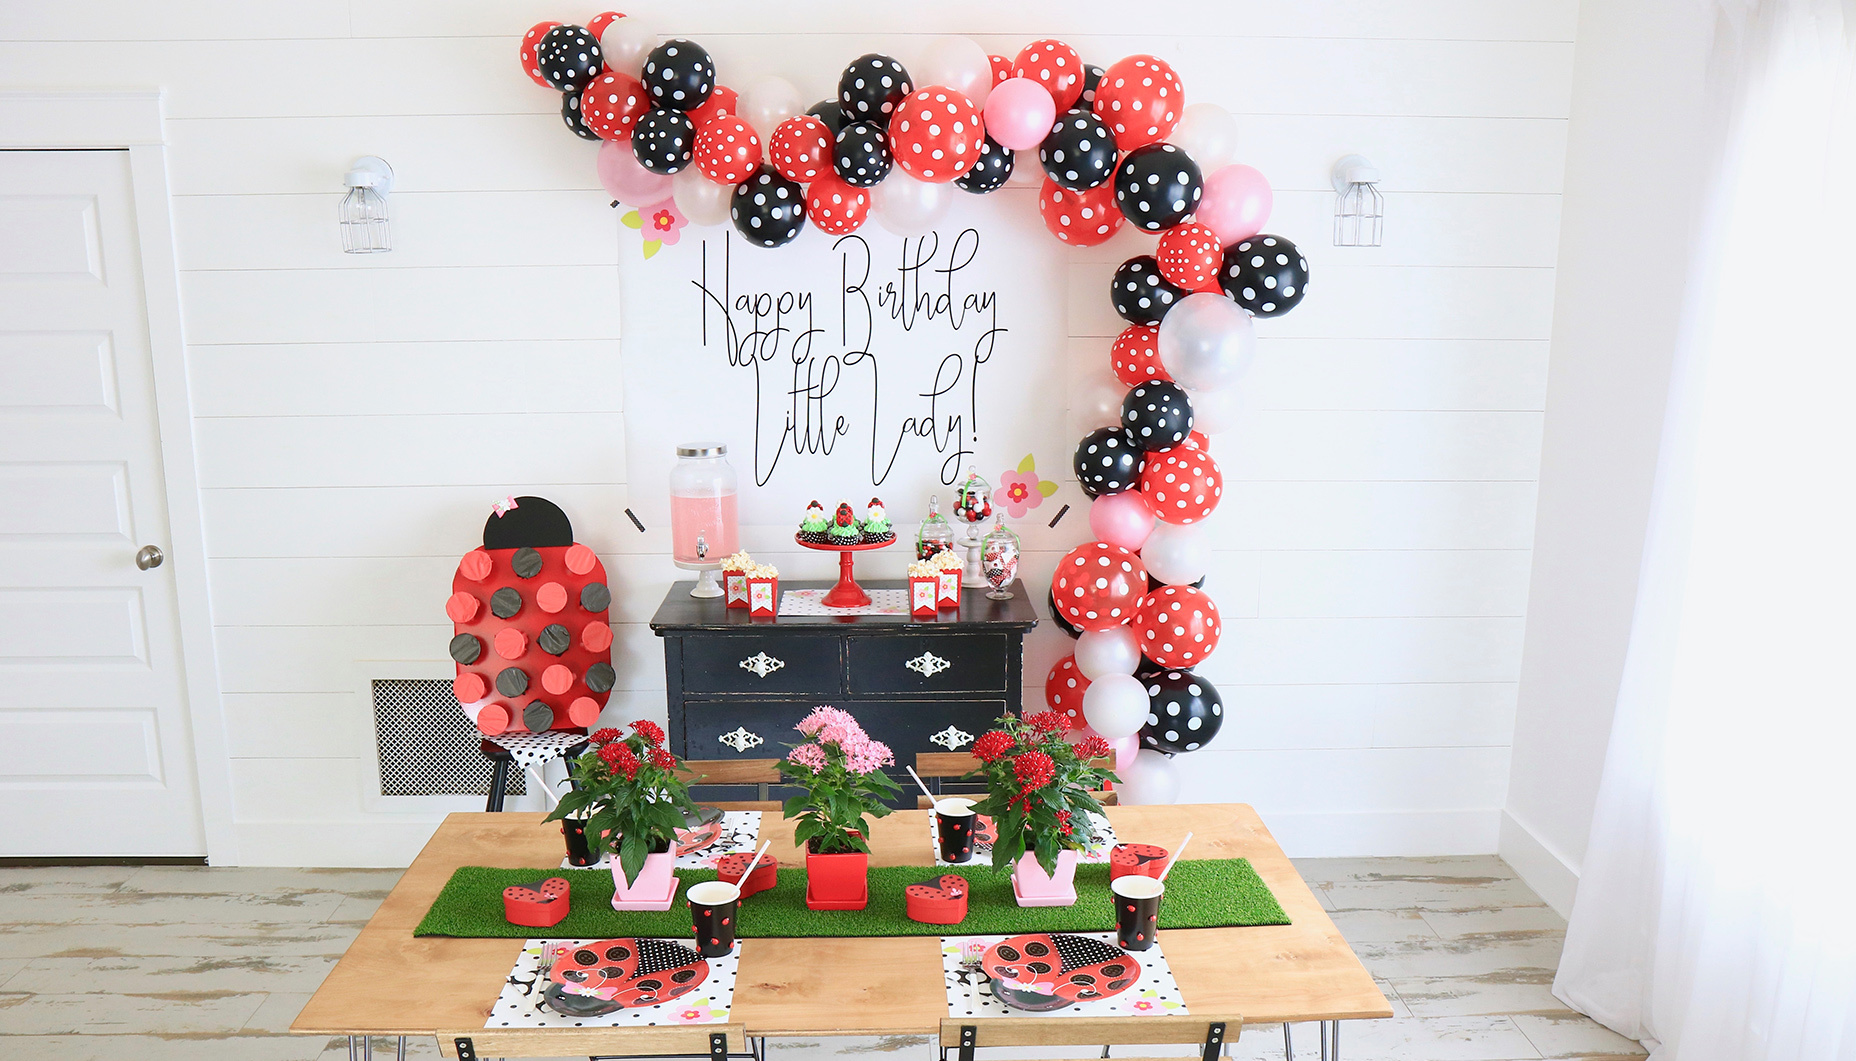 Ladybug Theme Birthday Party Backdrop Girls First Birthday Background Our Little Ladybug is Turning One Party Decorations Kids Happy 1st Birthday Decorations Cake Table Photo Banner 7x5ft 